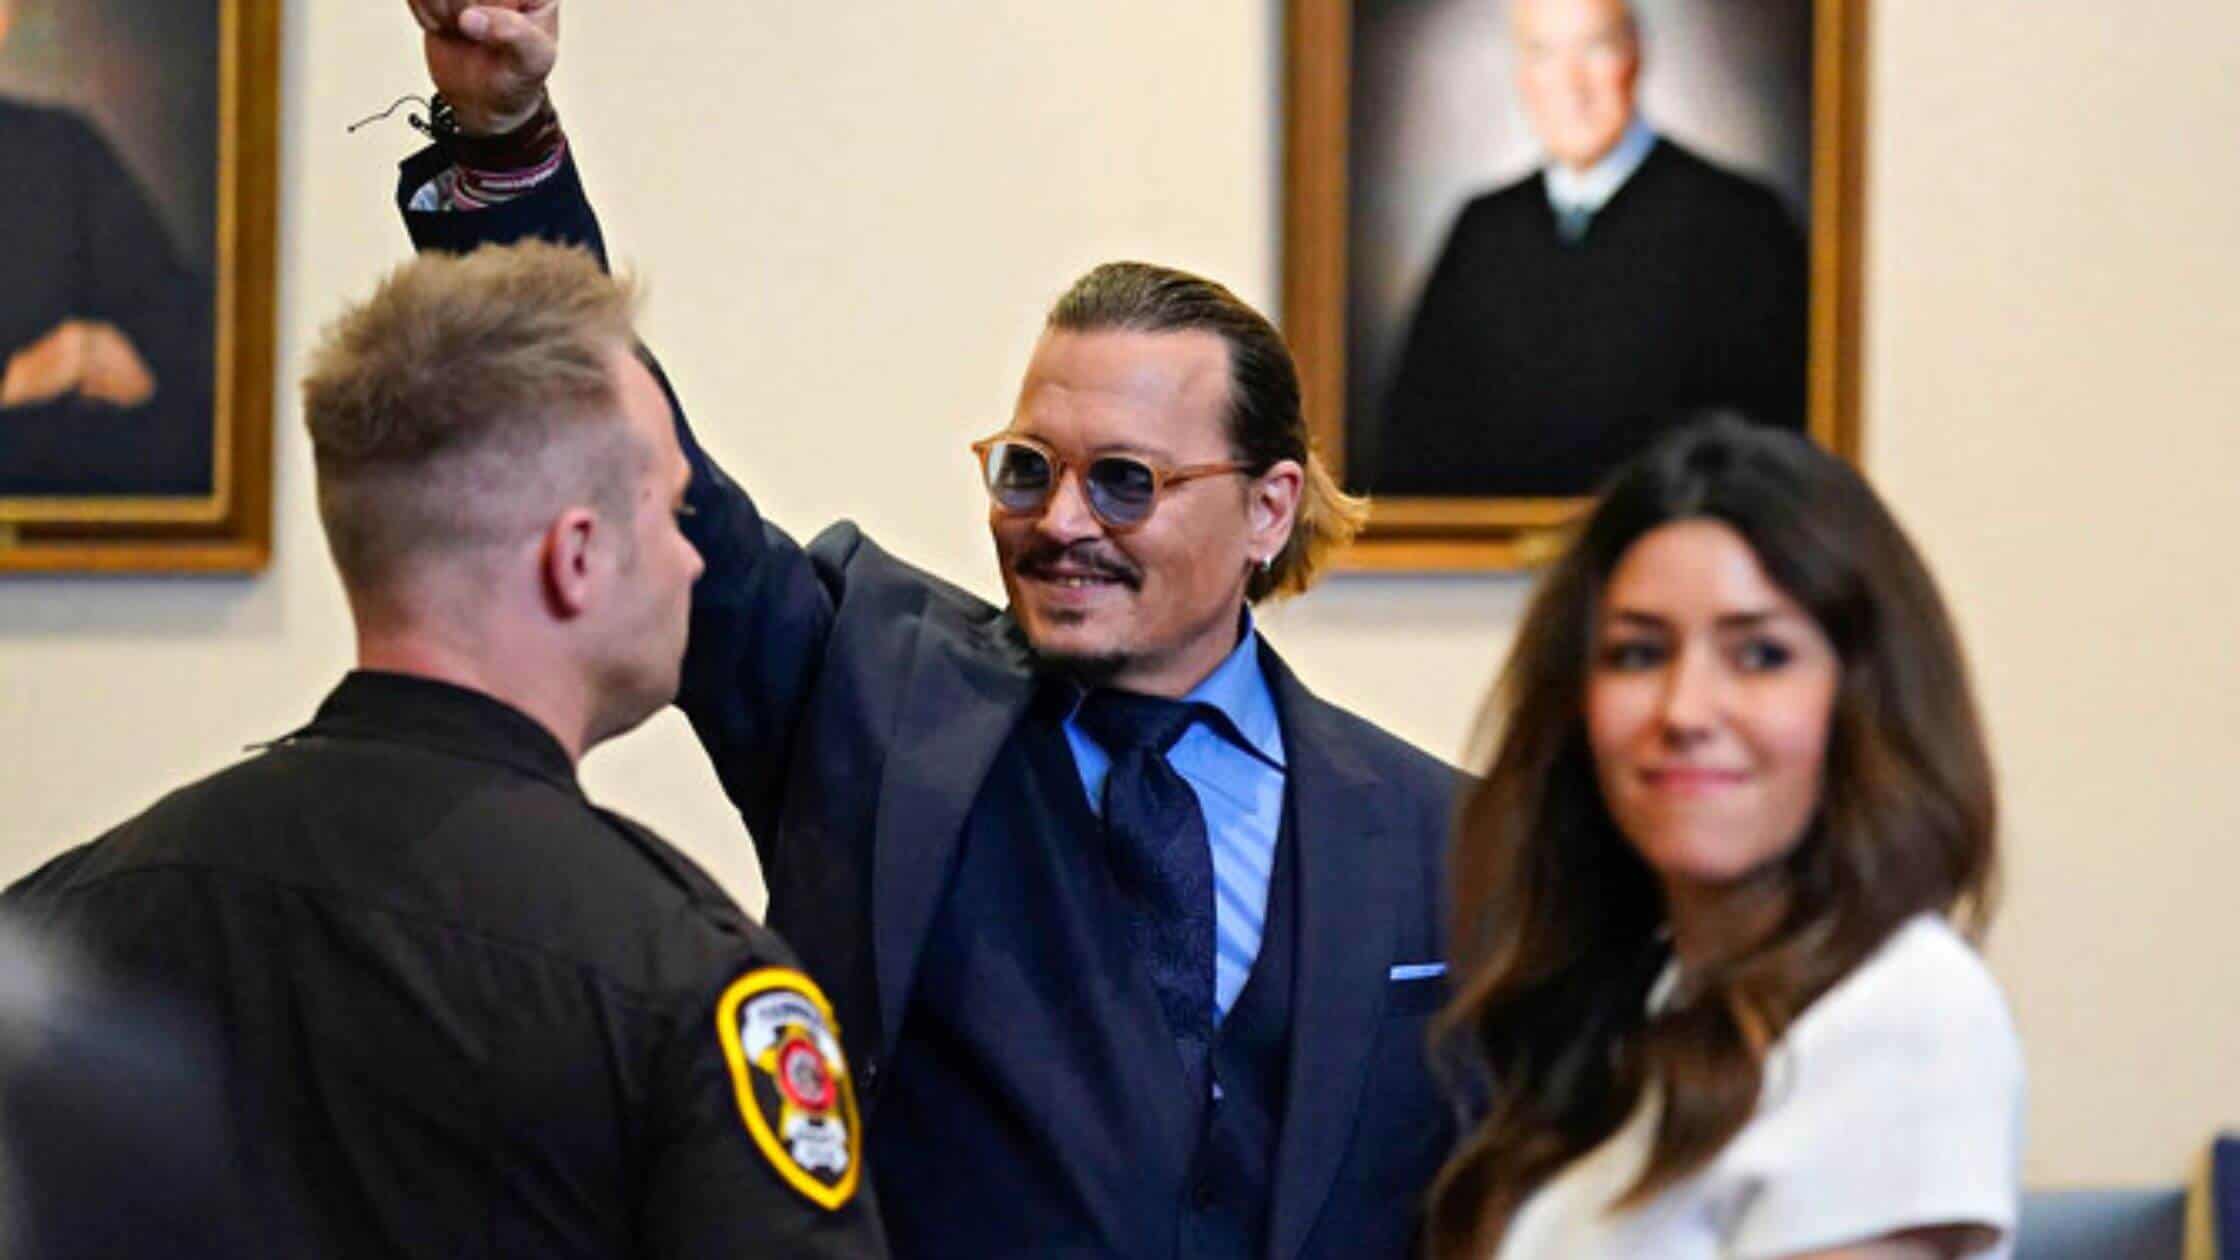 Johnny At Cloud Nine, Lawyers Said After Amber Heard Trail Verdict